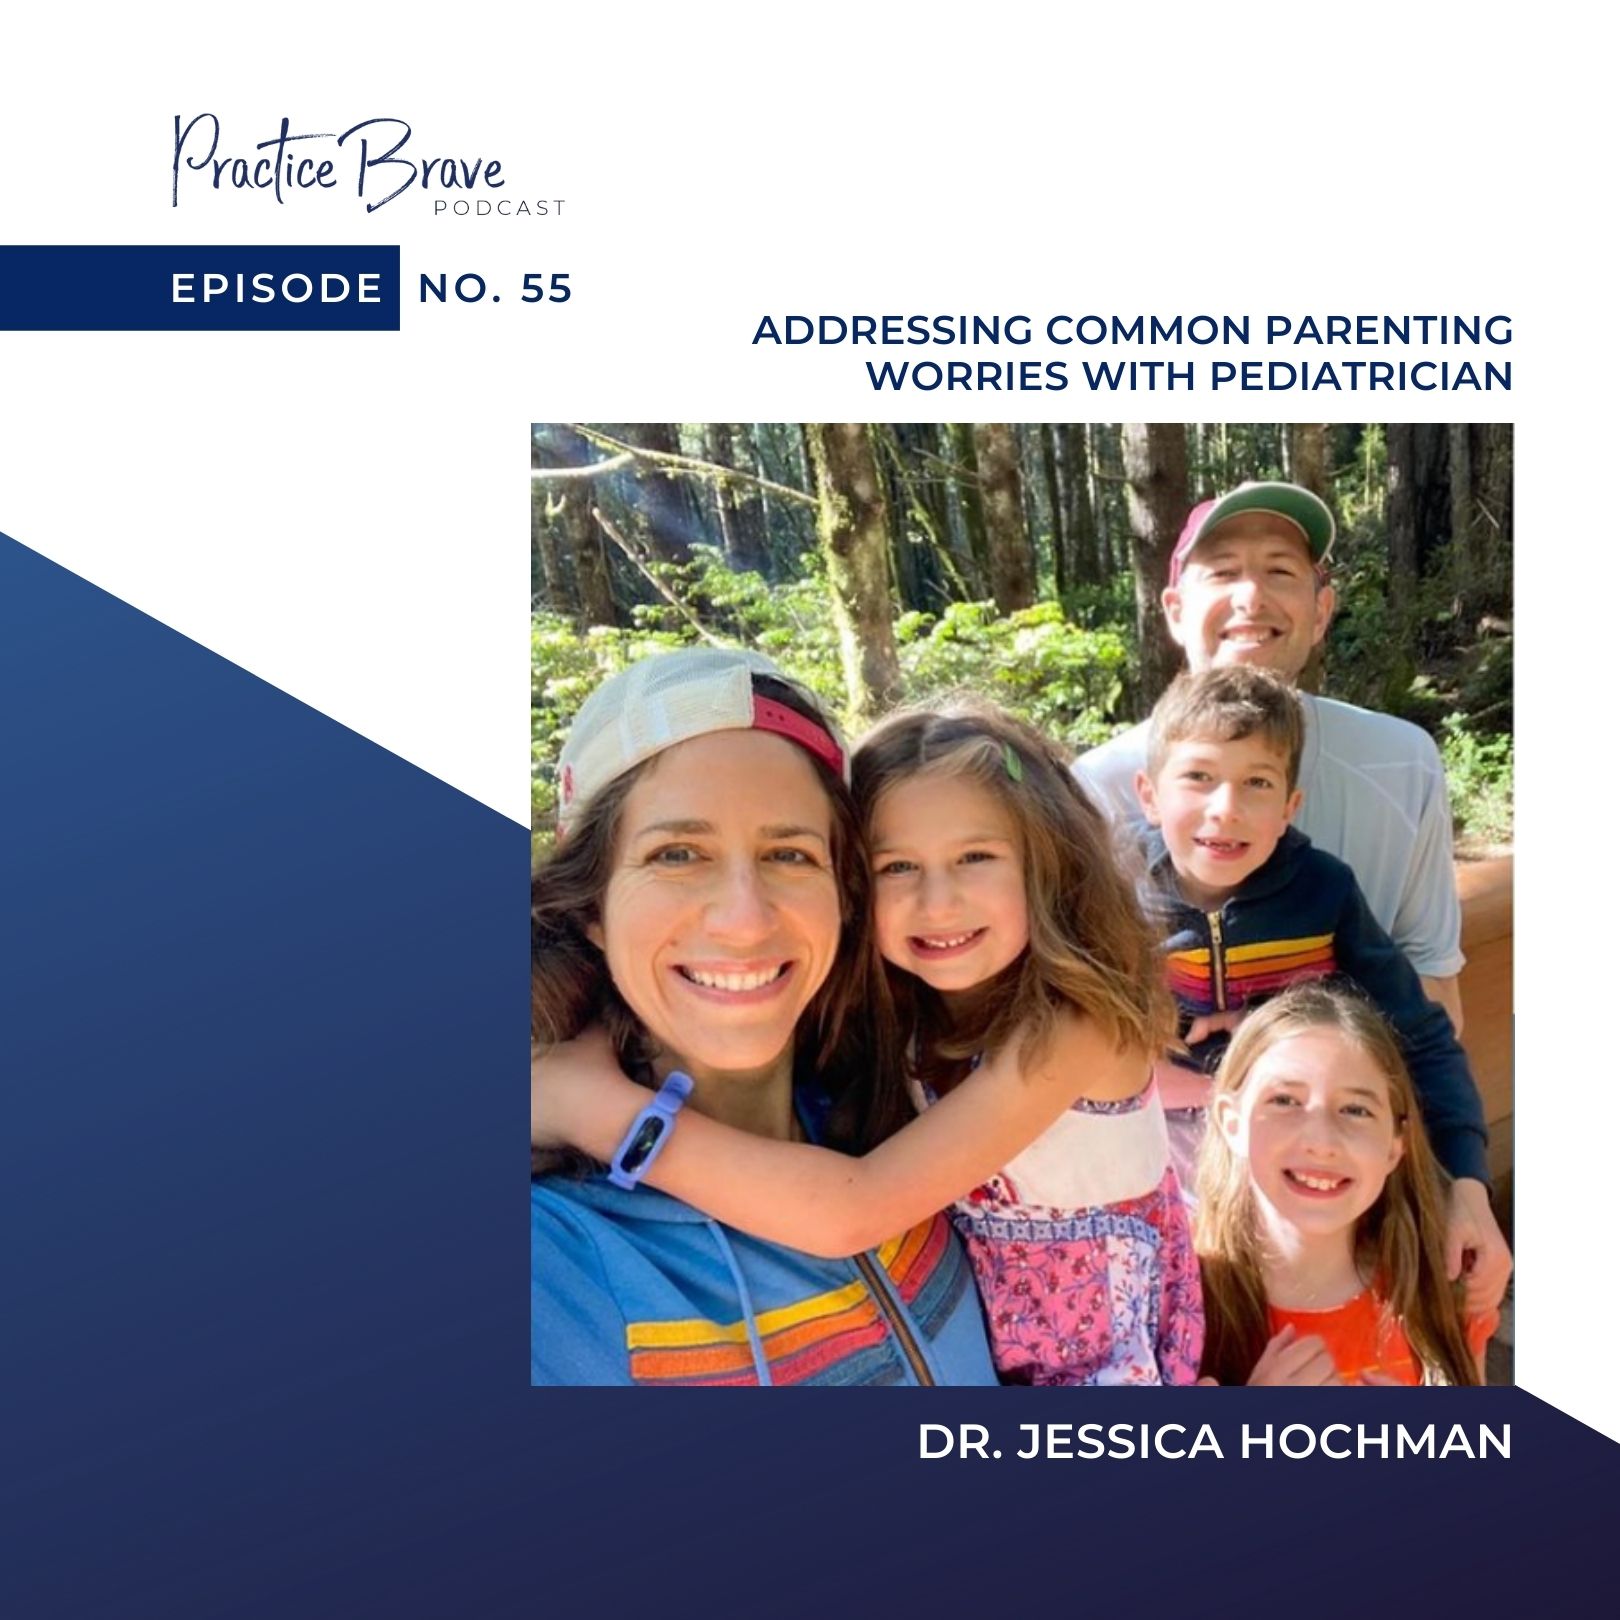 Episode 55: Addressing Common Parenting Worries With Pediatrician, Dr. Jessica Hochman